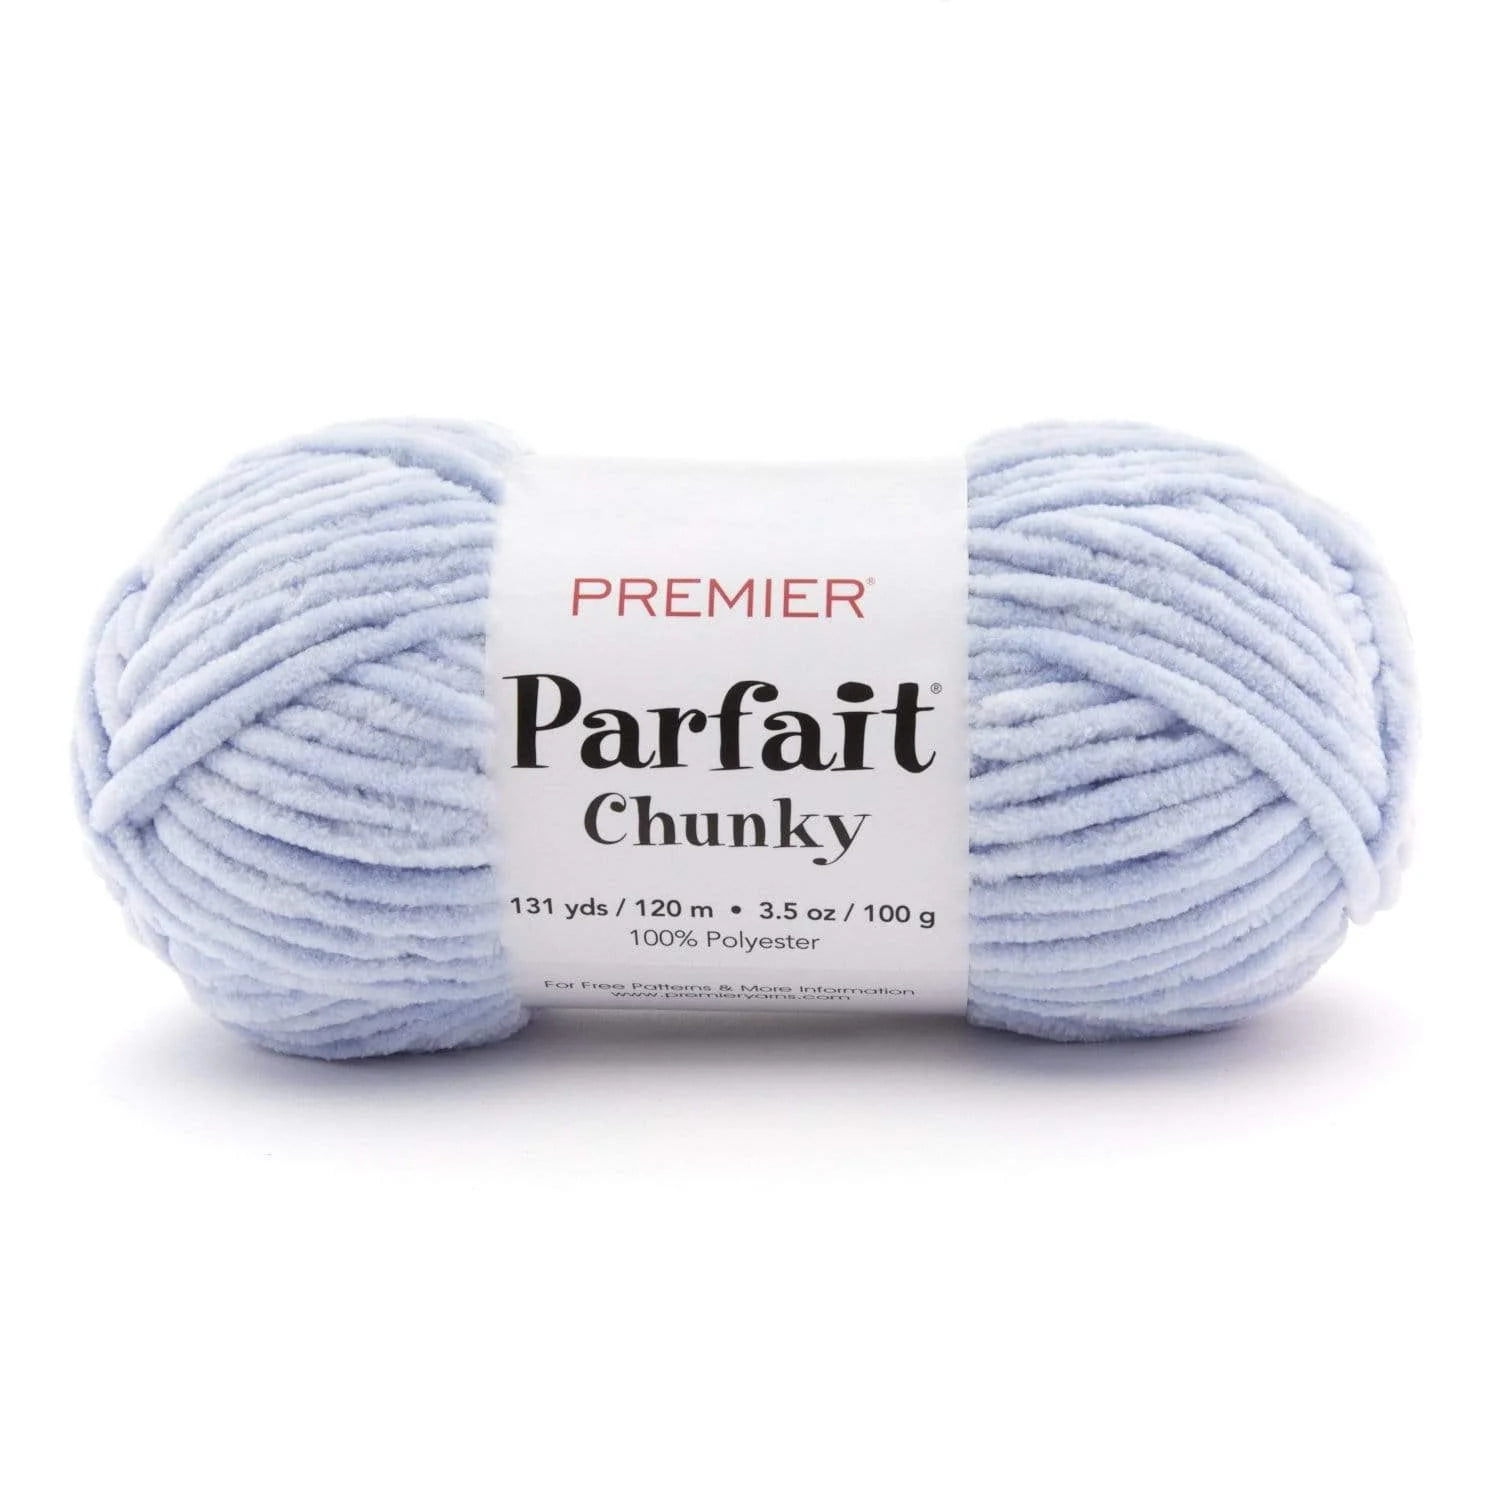 Comparing Chenille Yarn from Premier Yarns. Parfait, and Just